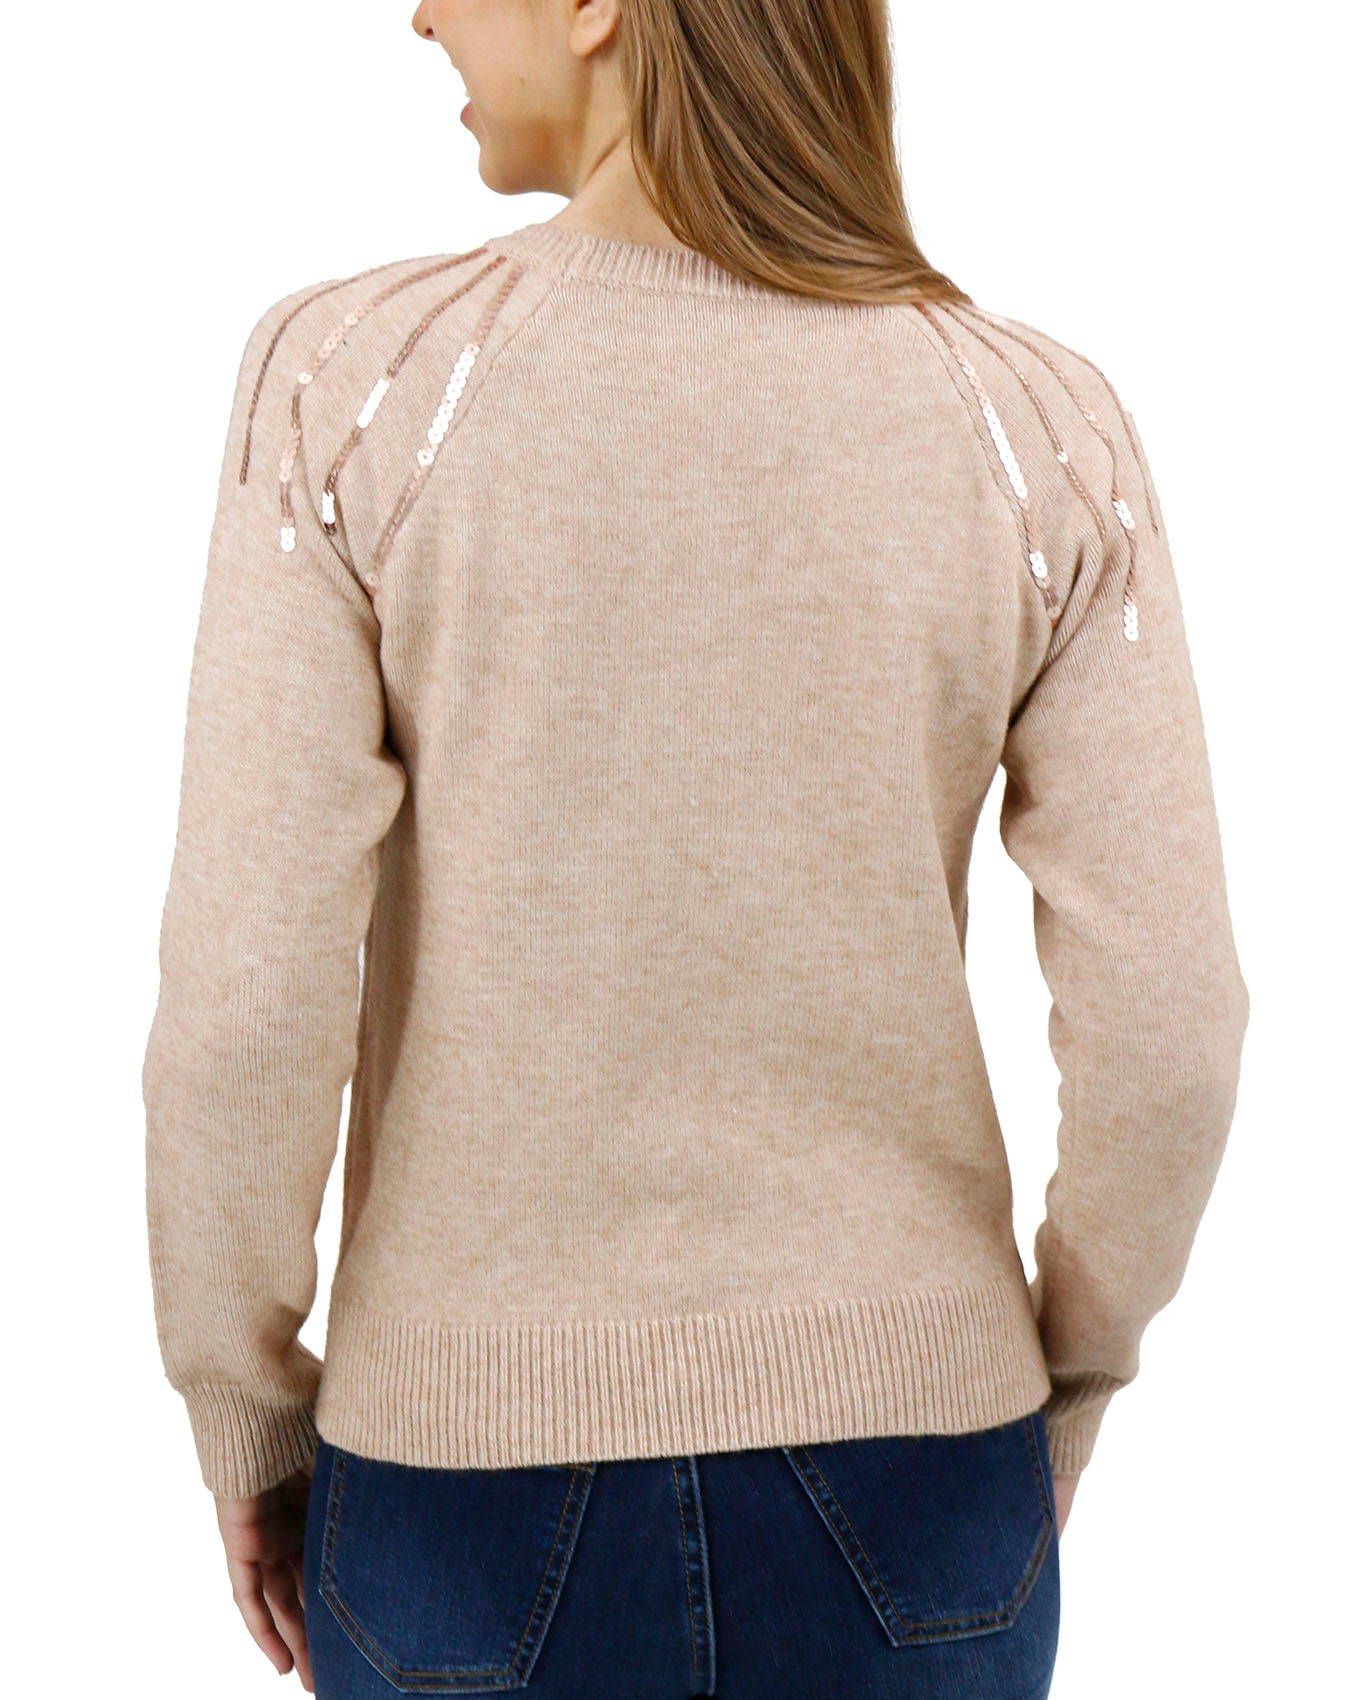 Back view stock shot of Shimmer Sweater